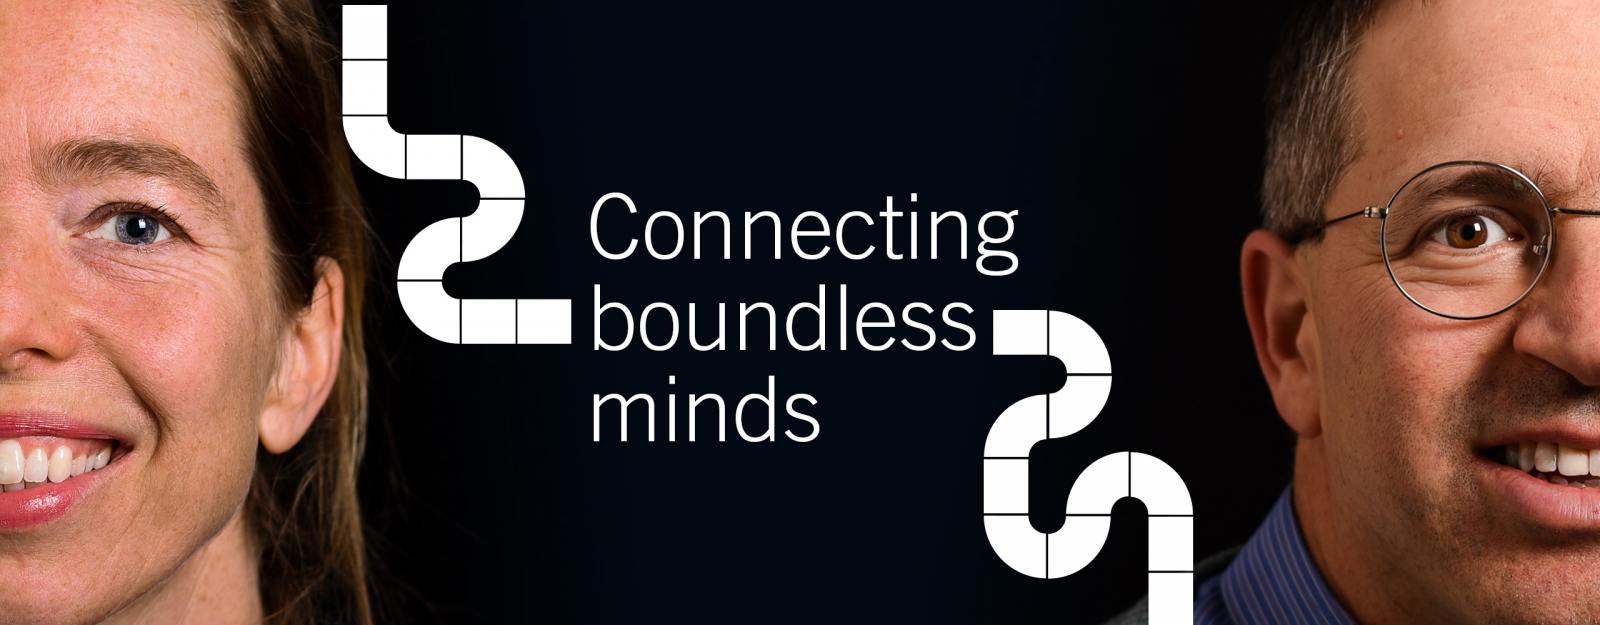 Suzanne Hansen and Gadi Rothenberg as figureheads of the Connecting Boundless Minds campaign at Amsterdam Science Park